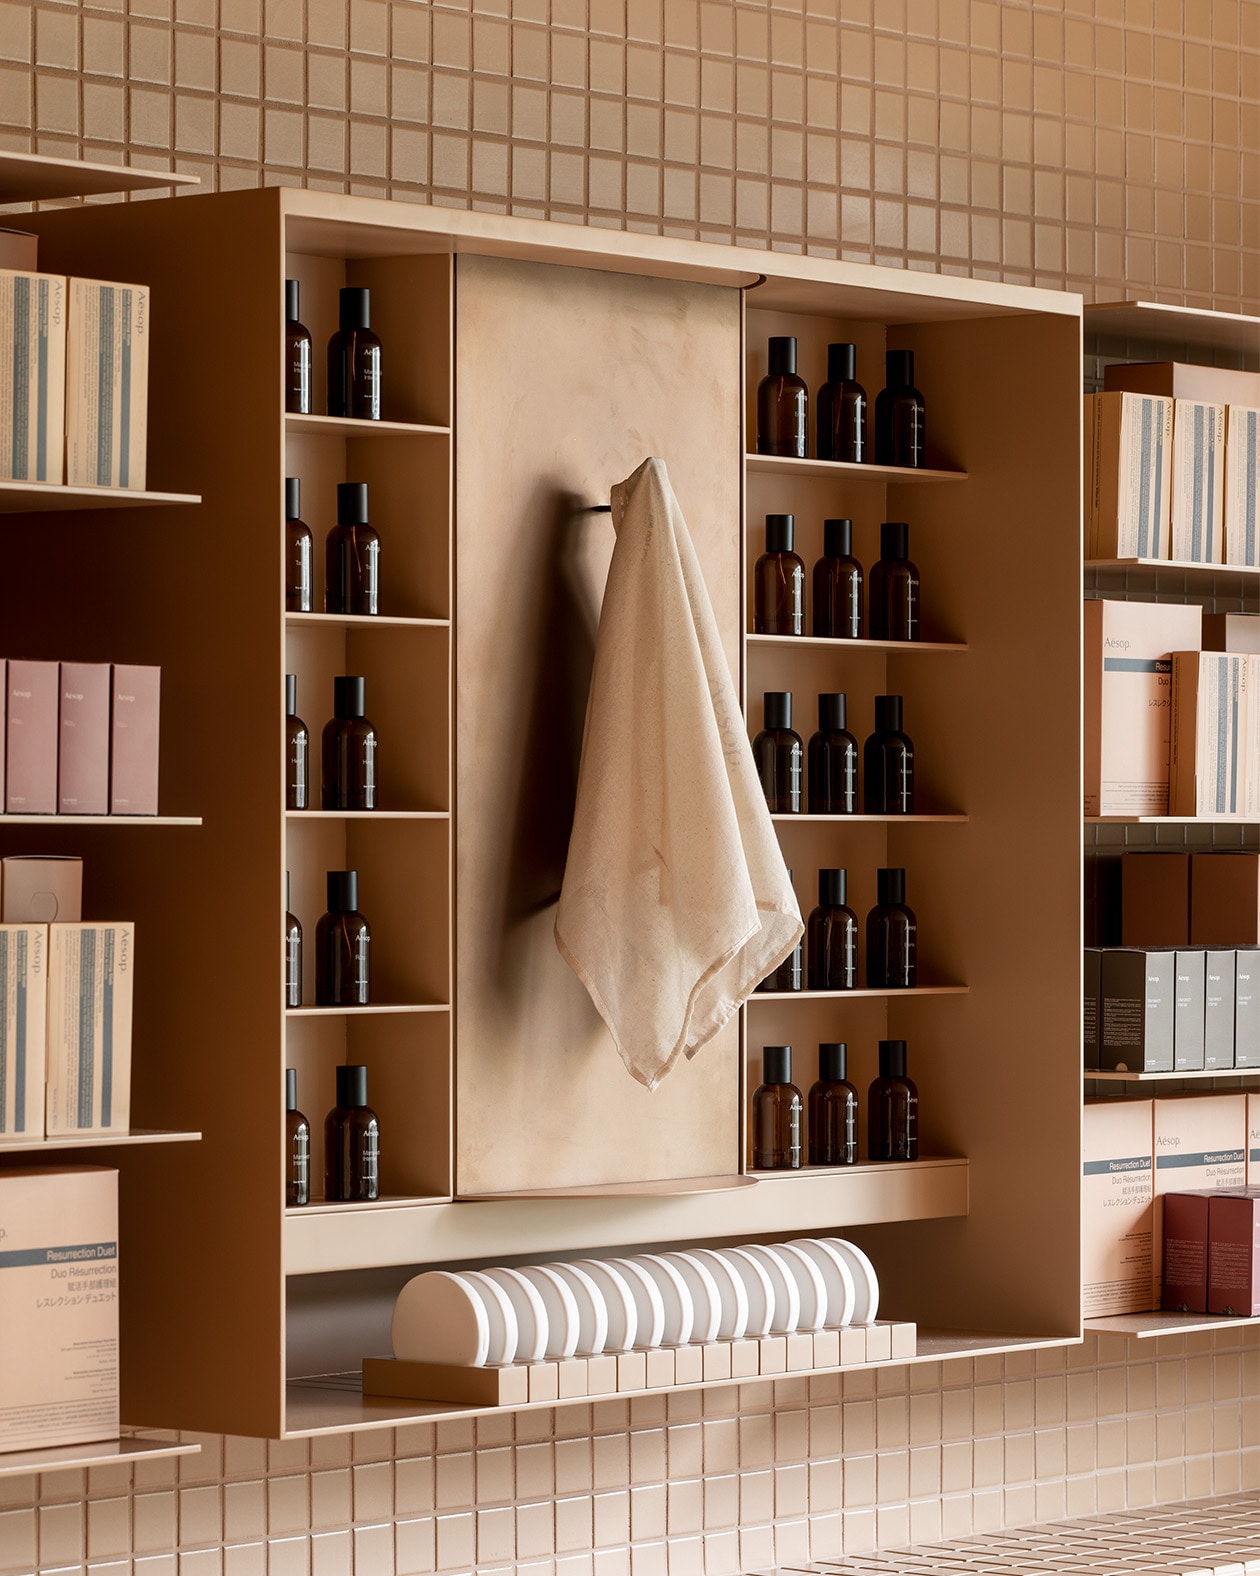 Eslite Xinyi store interior with towel and fragrance products display on the shelves